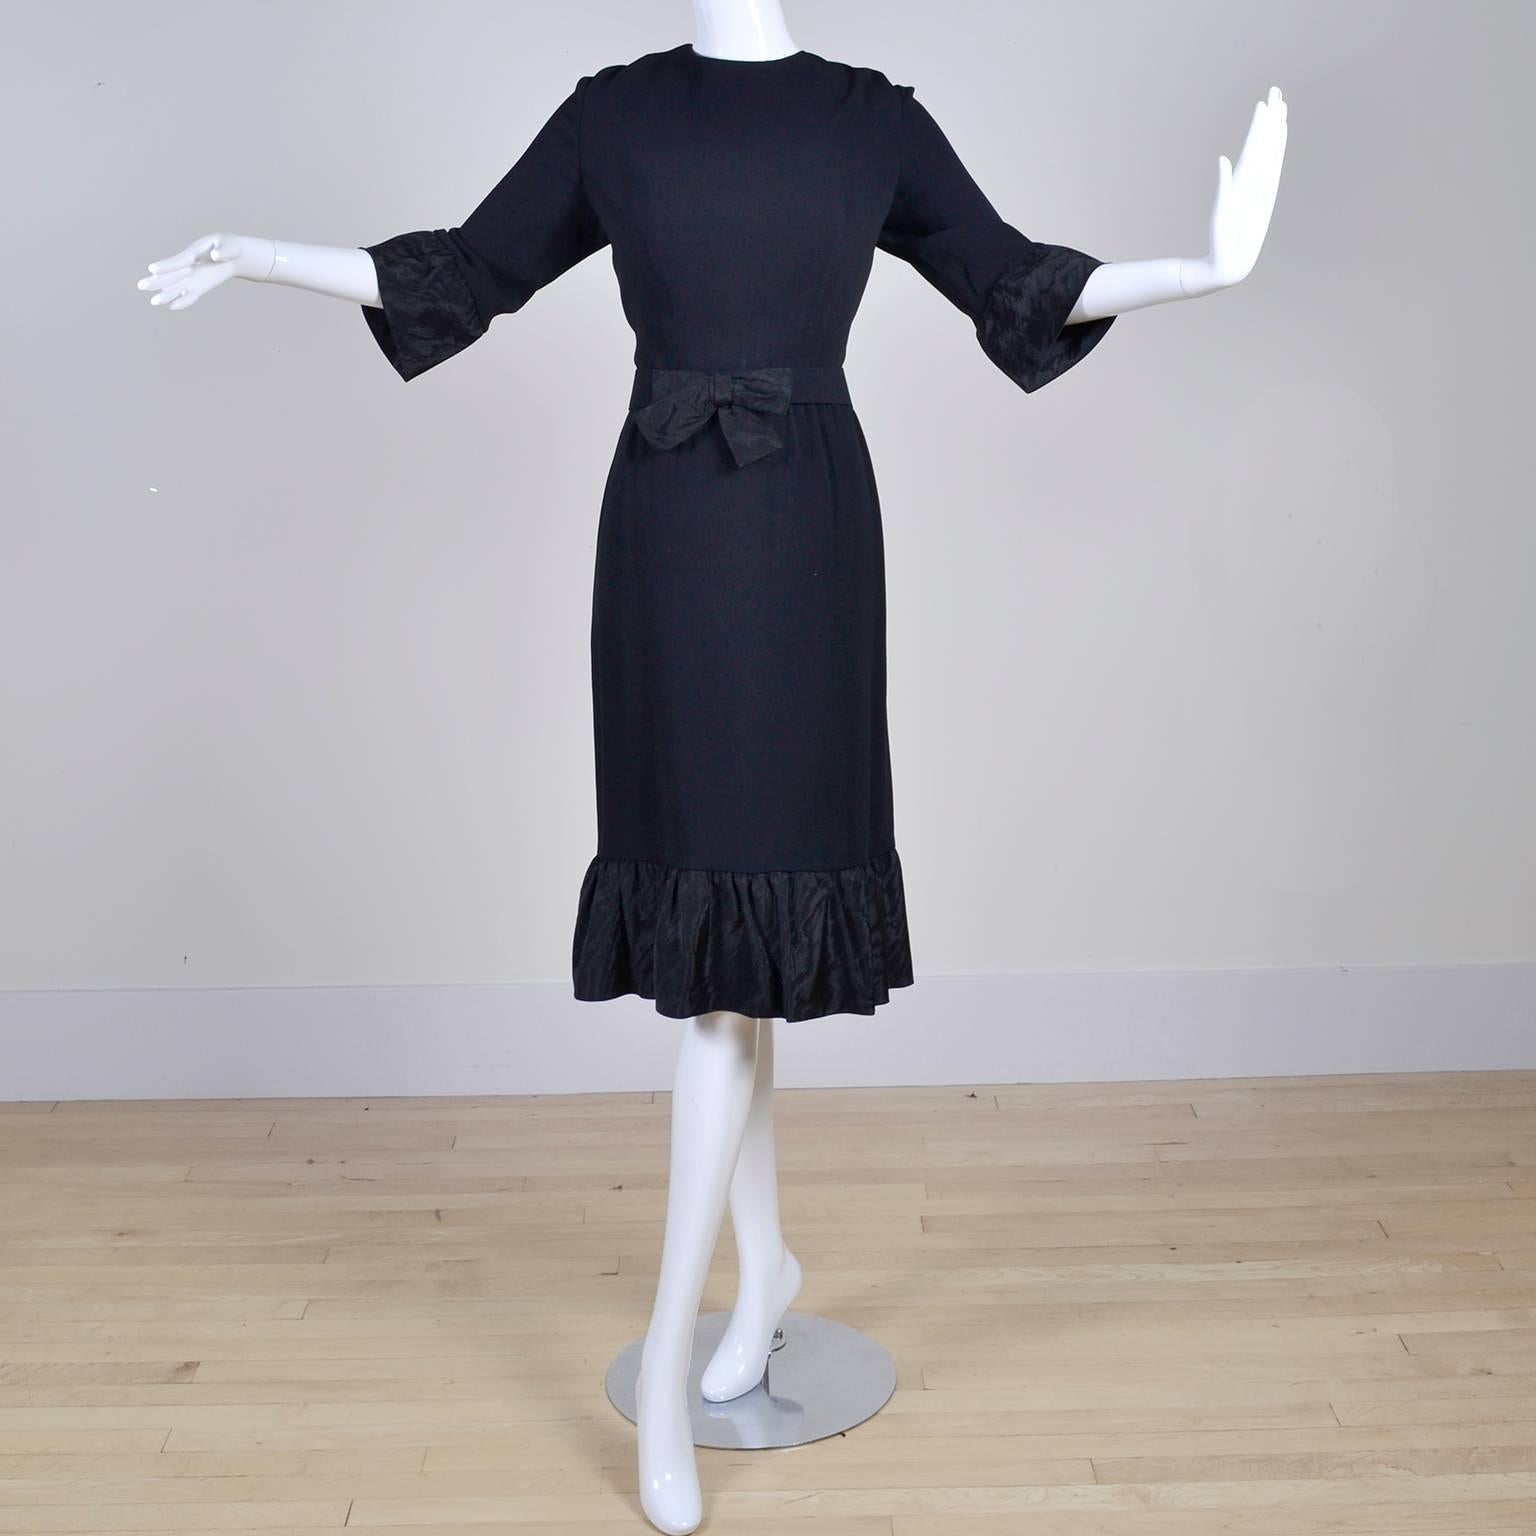 This vintage dress was designed by Jo Copeland in the late 1960's. The dress is a fine wool crepe with fabulous taffeta ruffles at the cuffs and hemline. This wonderful Pattullo-Jo Copeland dress has 3/4 length sleeves, is fully lined and comes with